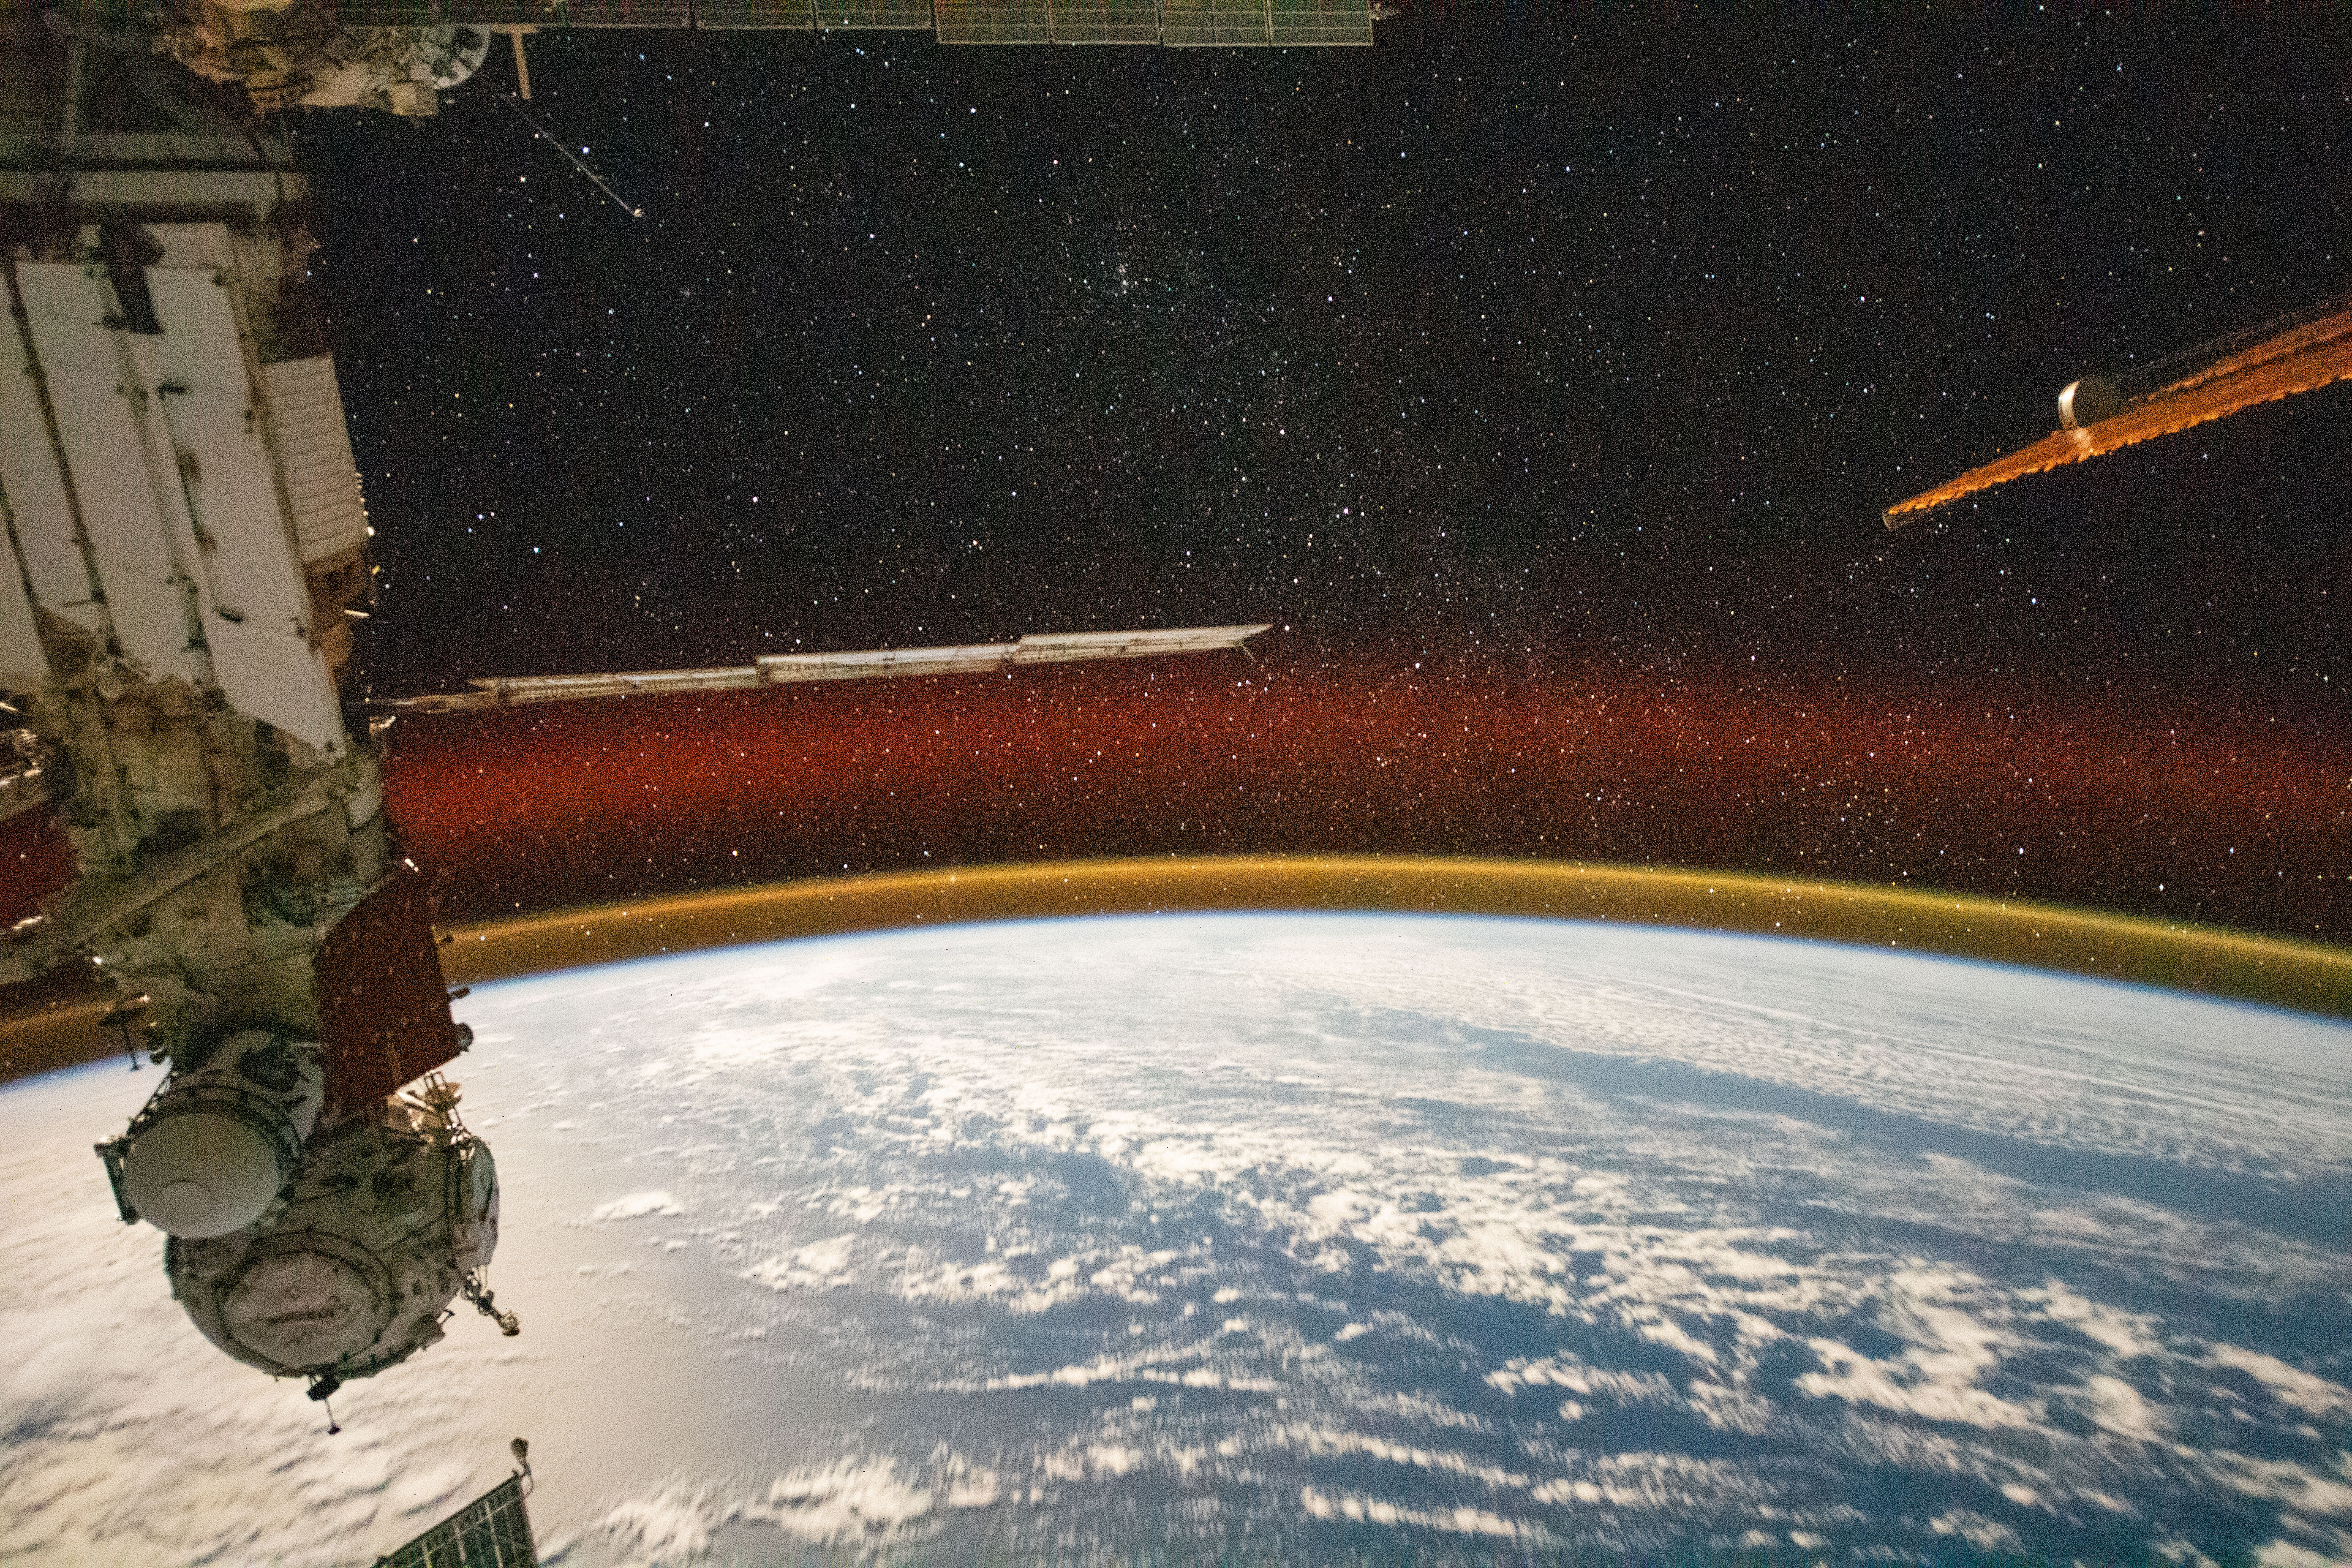 The Pacific Ocean, peppered with bands of white clouds, is seen below a starry sky from the vantage point of the International Space Station. Above the curve of the globe, a well-defined atmospheric glow of yellow-orange is visible, with an additional band of red slightly above. The space station's Nauka science module and Prichal docking module are visible on the left.